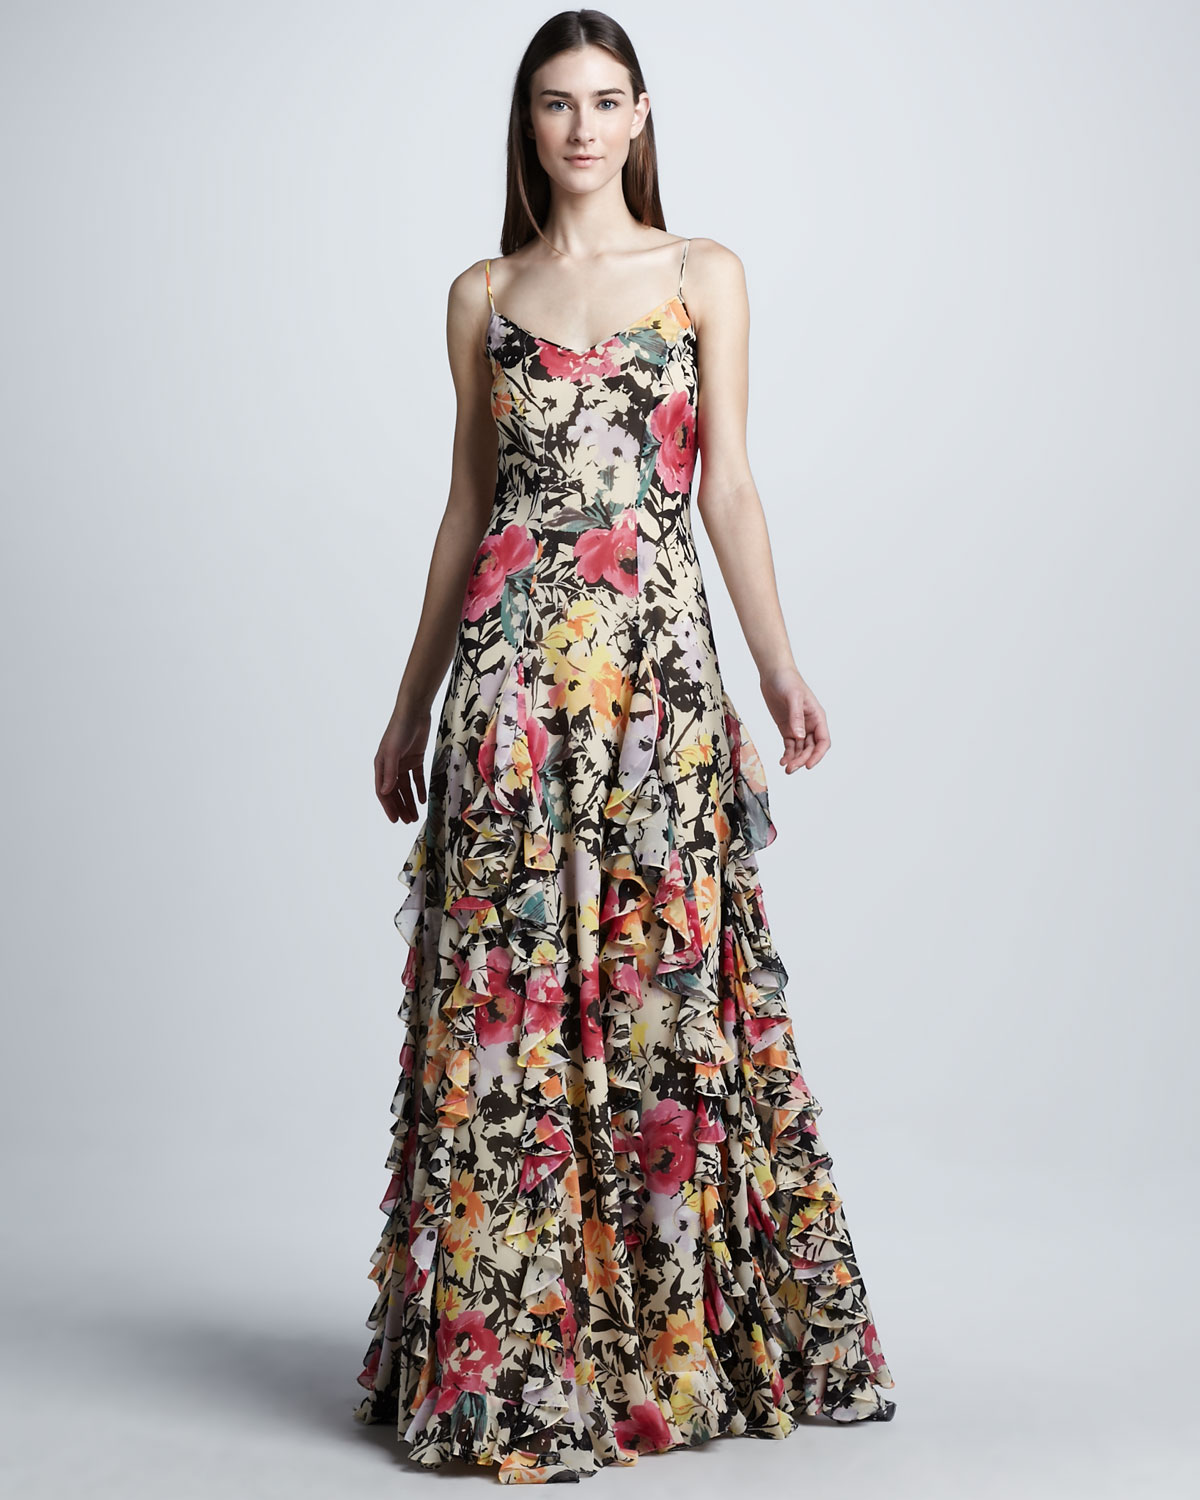 Evening Collection Dresses - Evening Wear